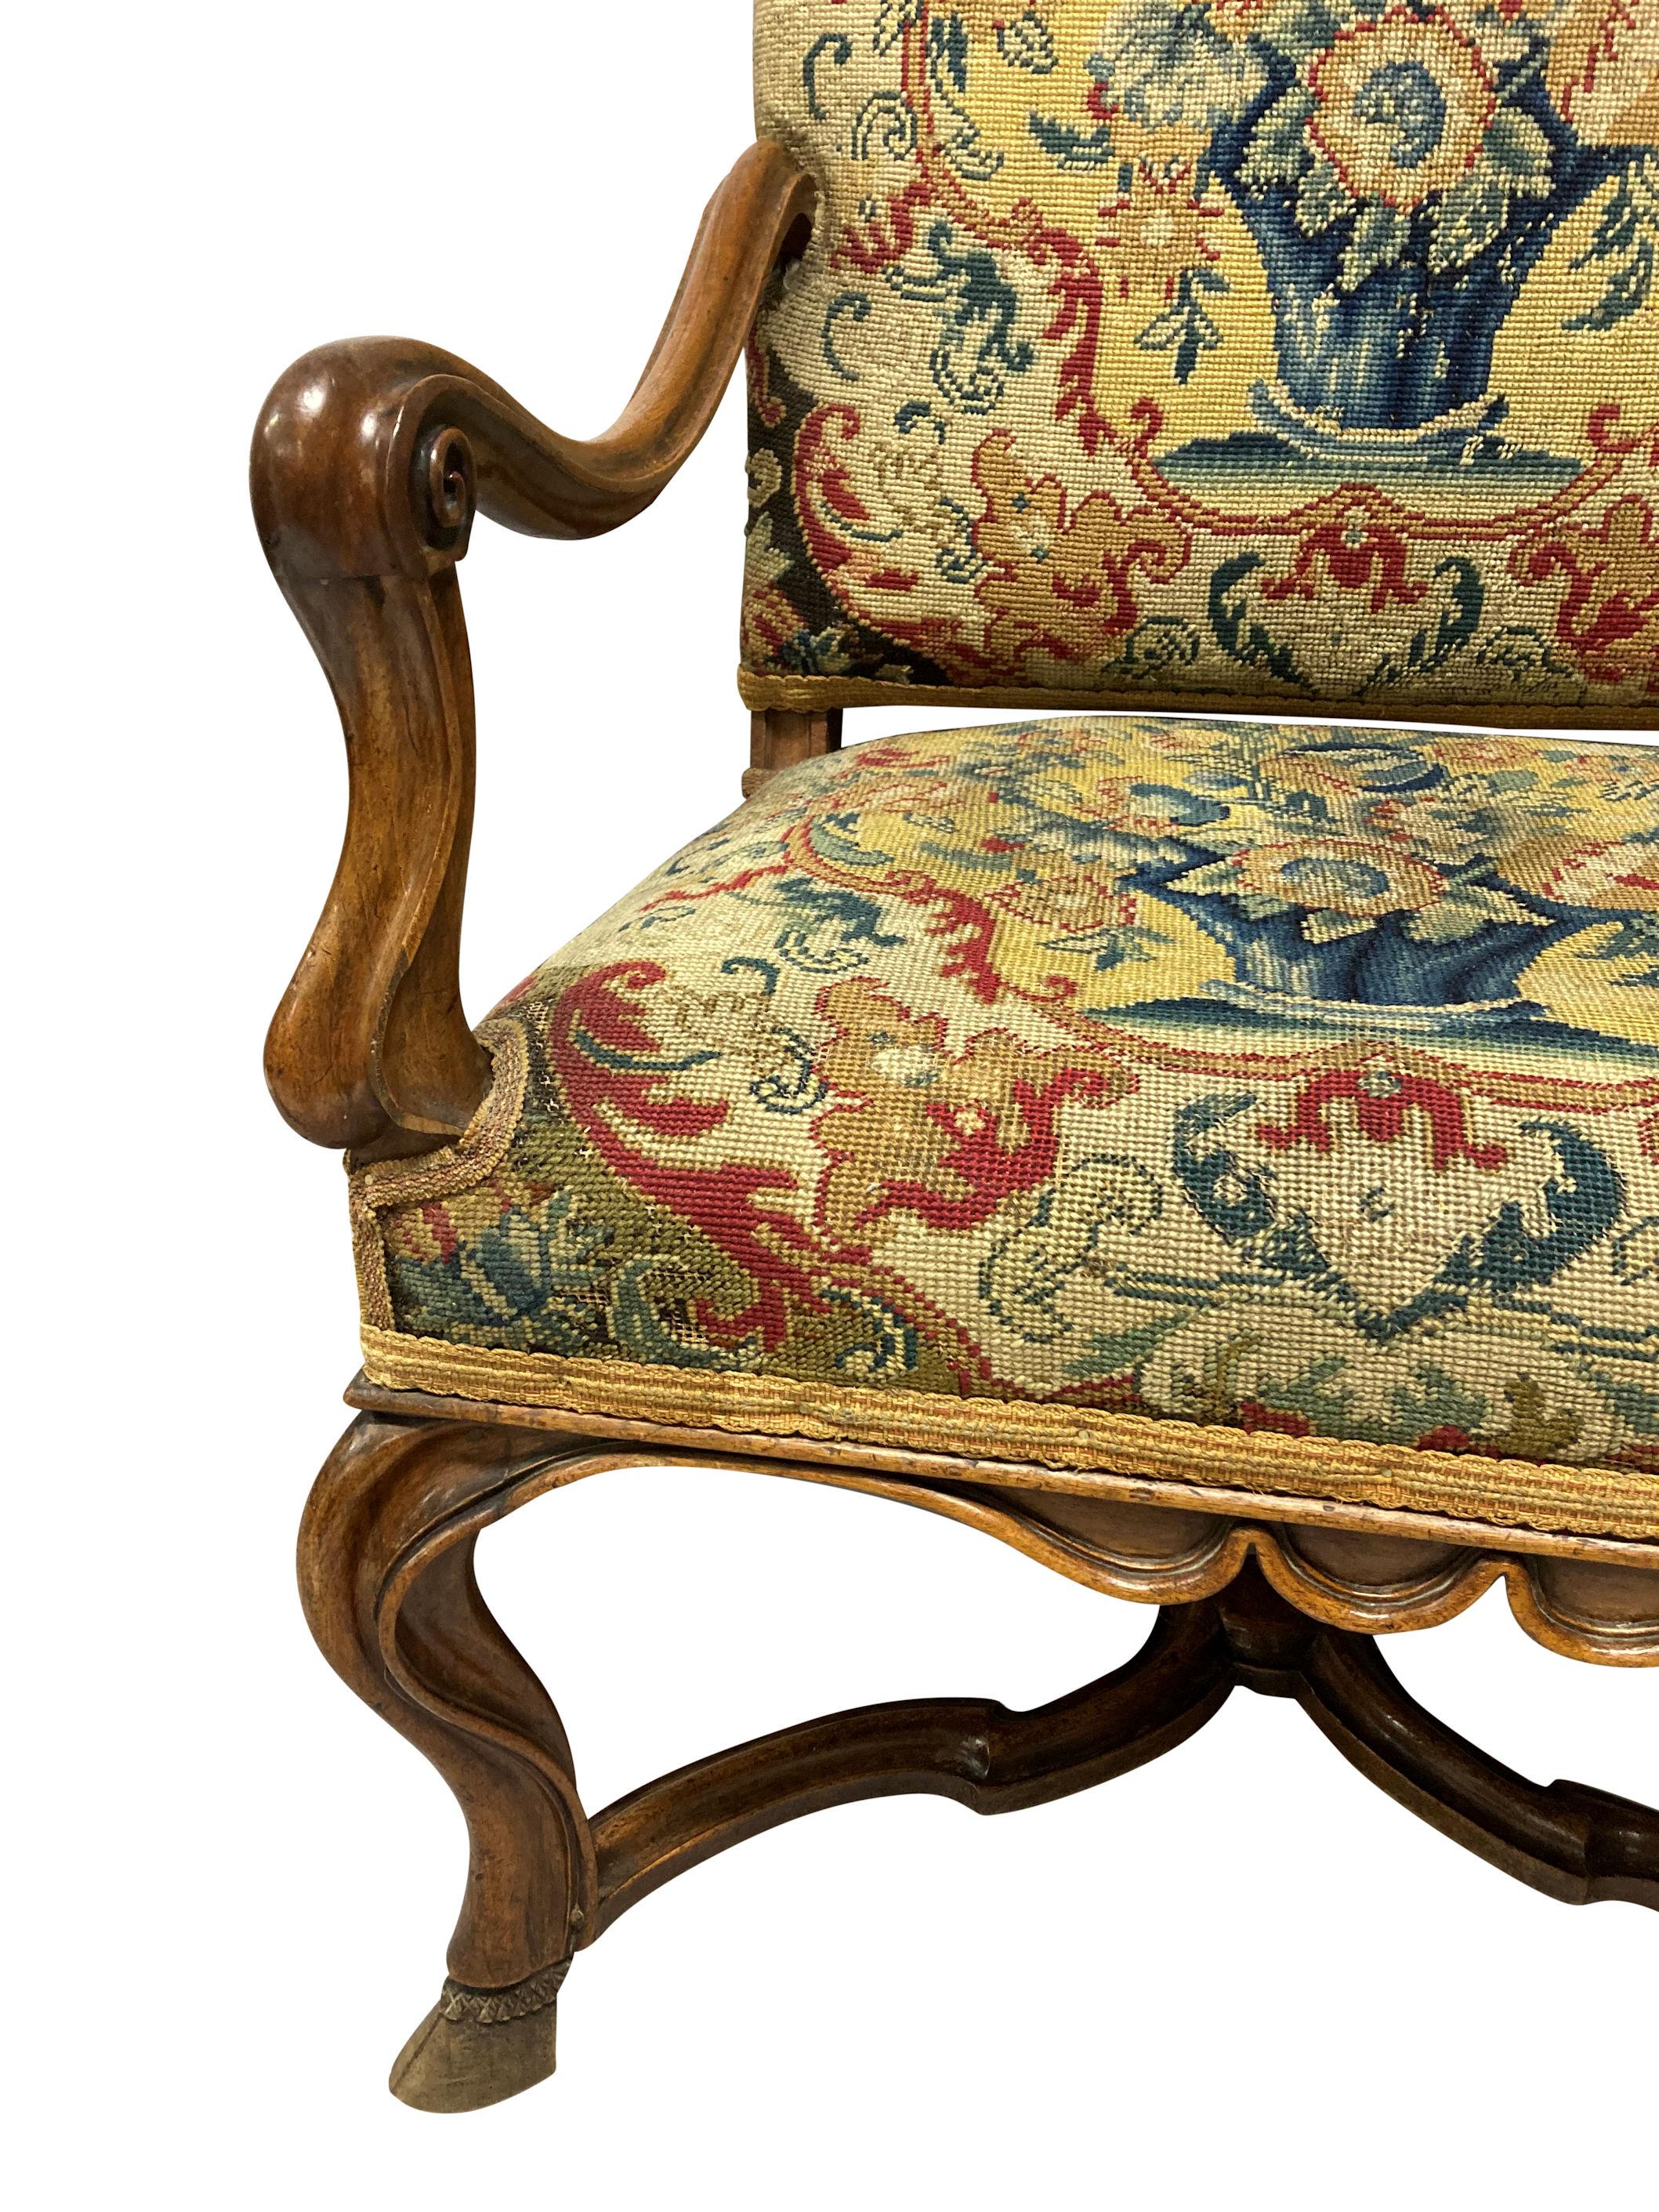 A fine William & Mary carved walnut armchair of good colour, with scrolled arms, stretcher and deer feet (the back two have partly worn down). Upholstered in an early XIX Century needlepoint tapestry in good condition.